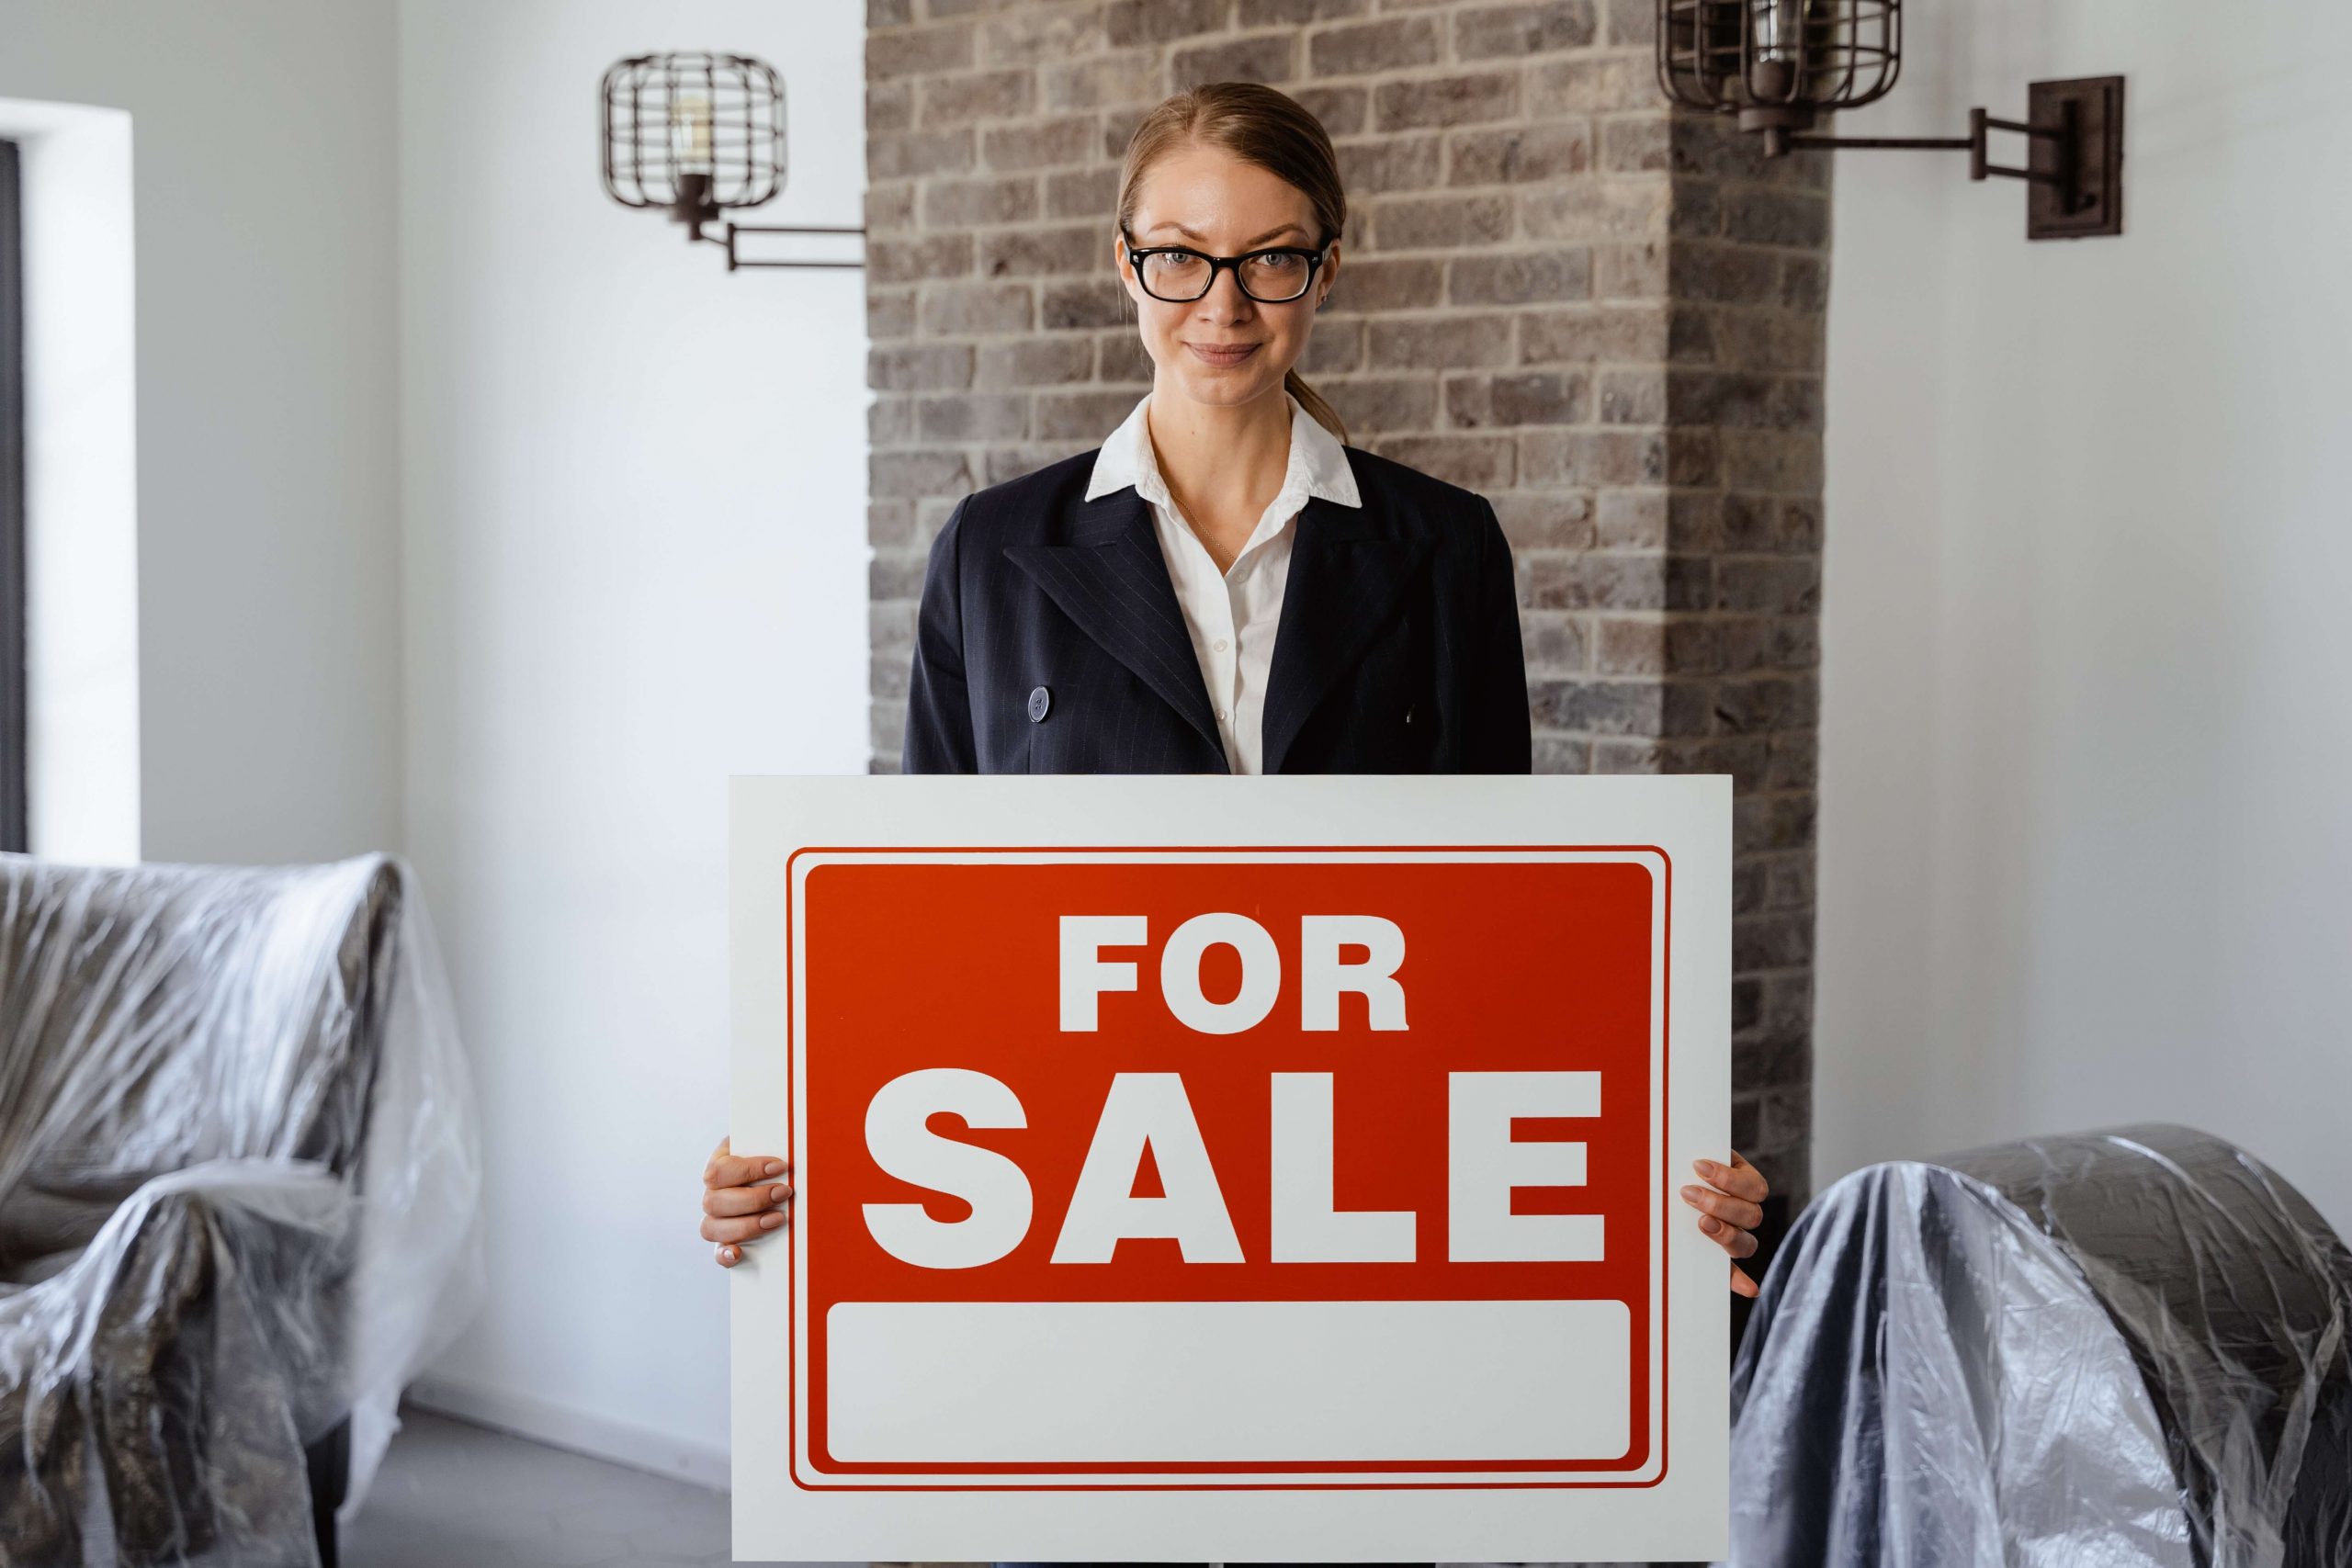 How Much Does A Real Estate Agent Make?